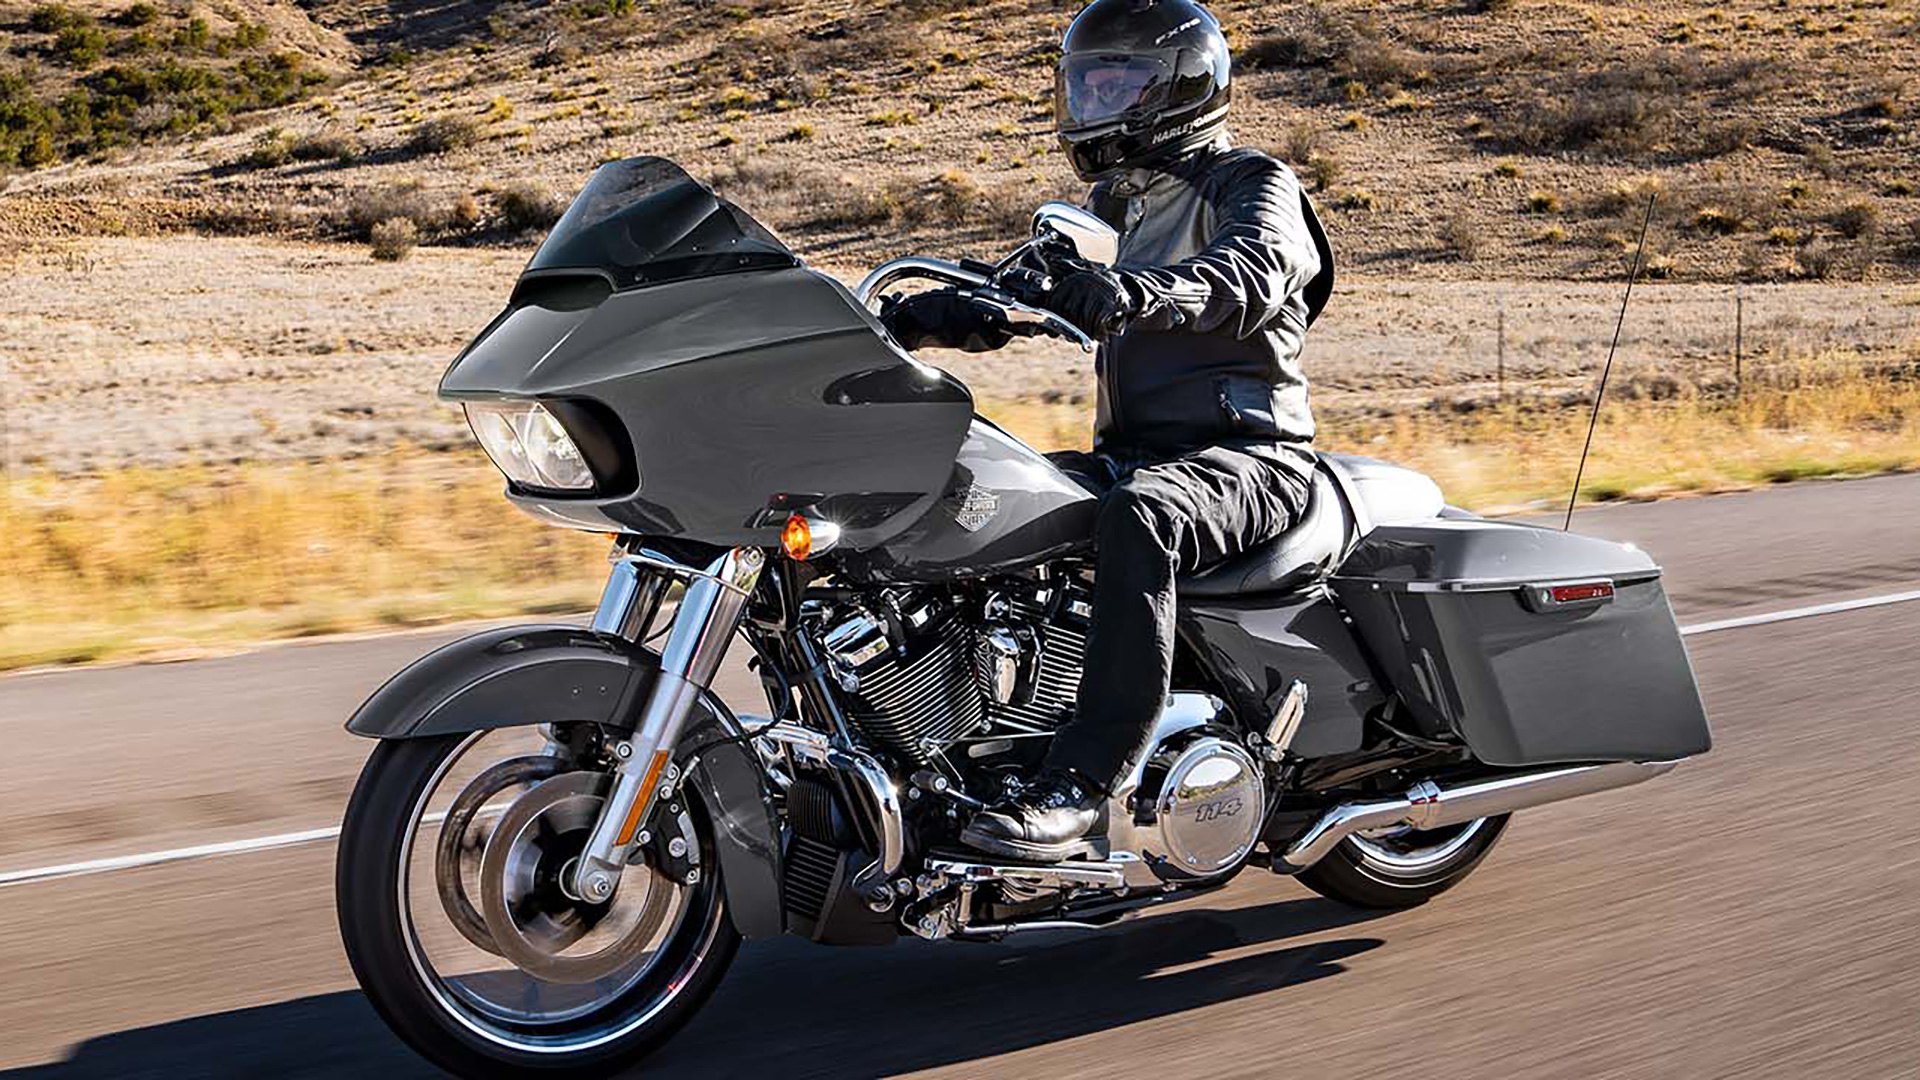 2022 Harley-Davidson Road Glide® Special in Houston, Texas - Photo 4